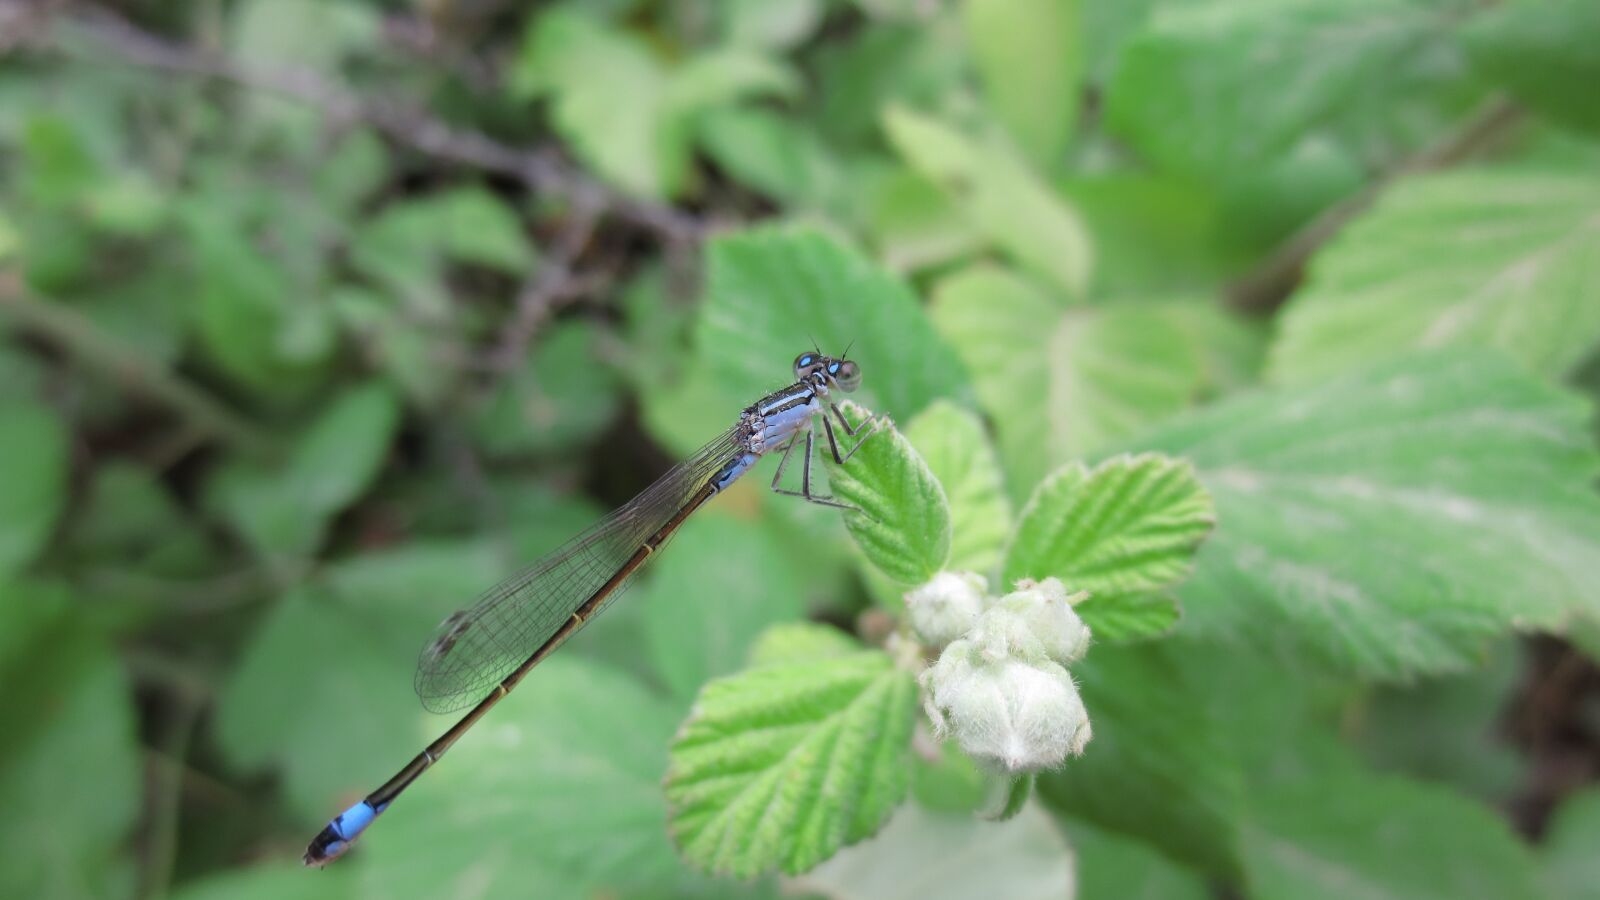 Canon IXY 420F sample photo. Insect, dragonfly, biology photography